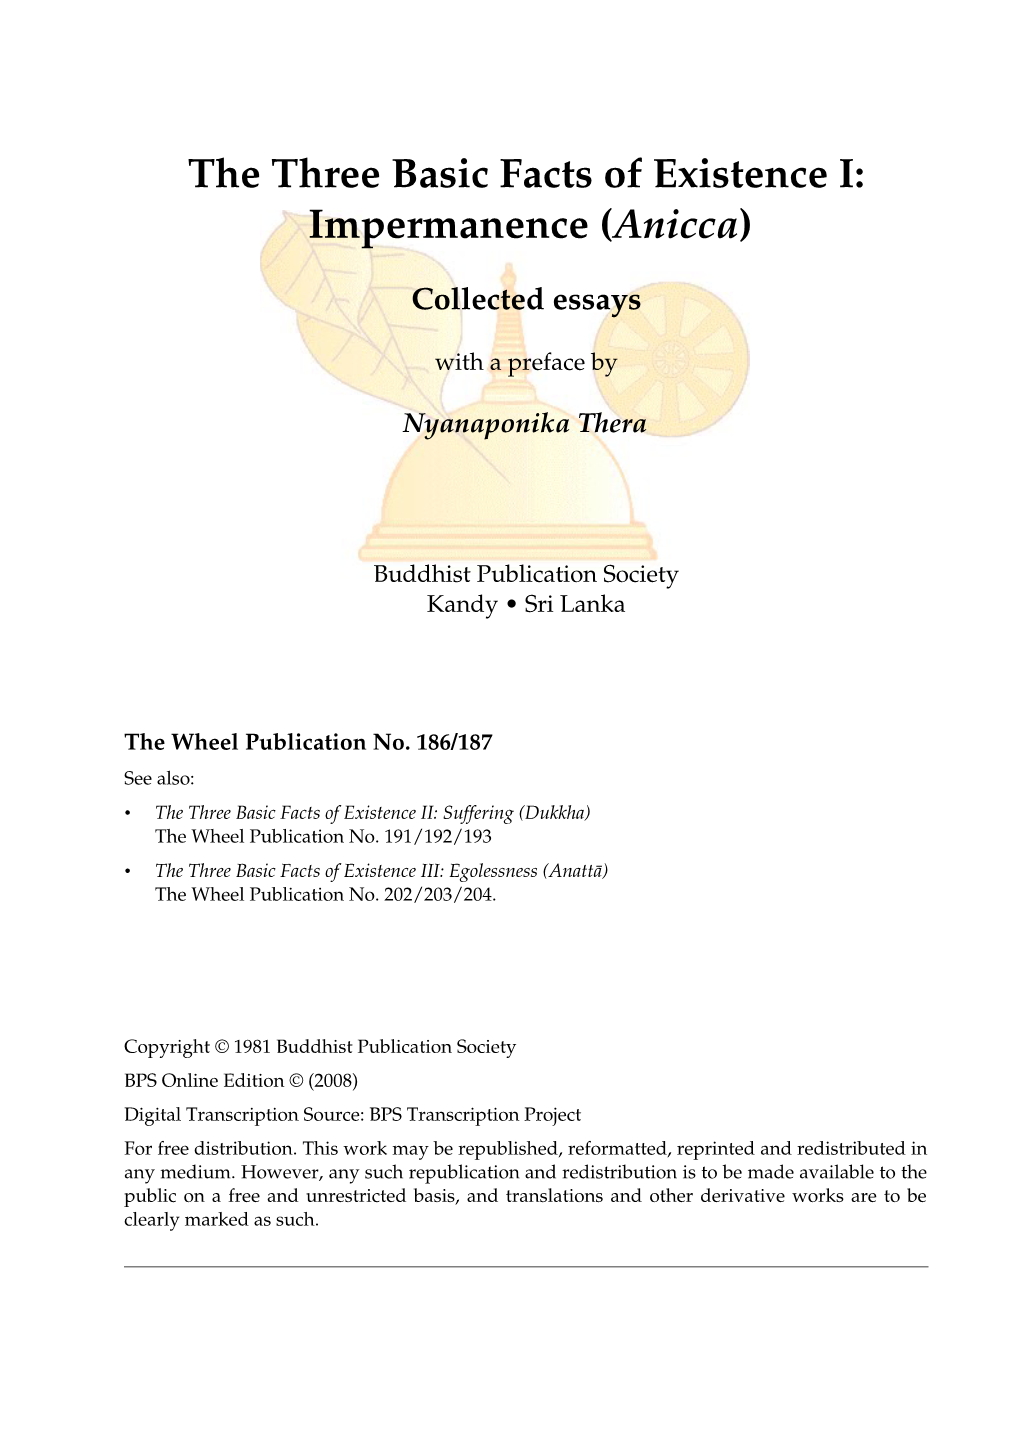 The Three Basic Facts of Existence I: Impermanence (Anicca)